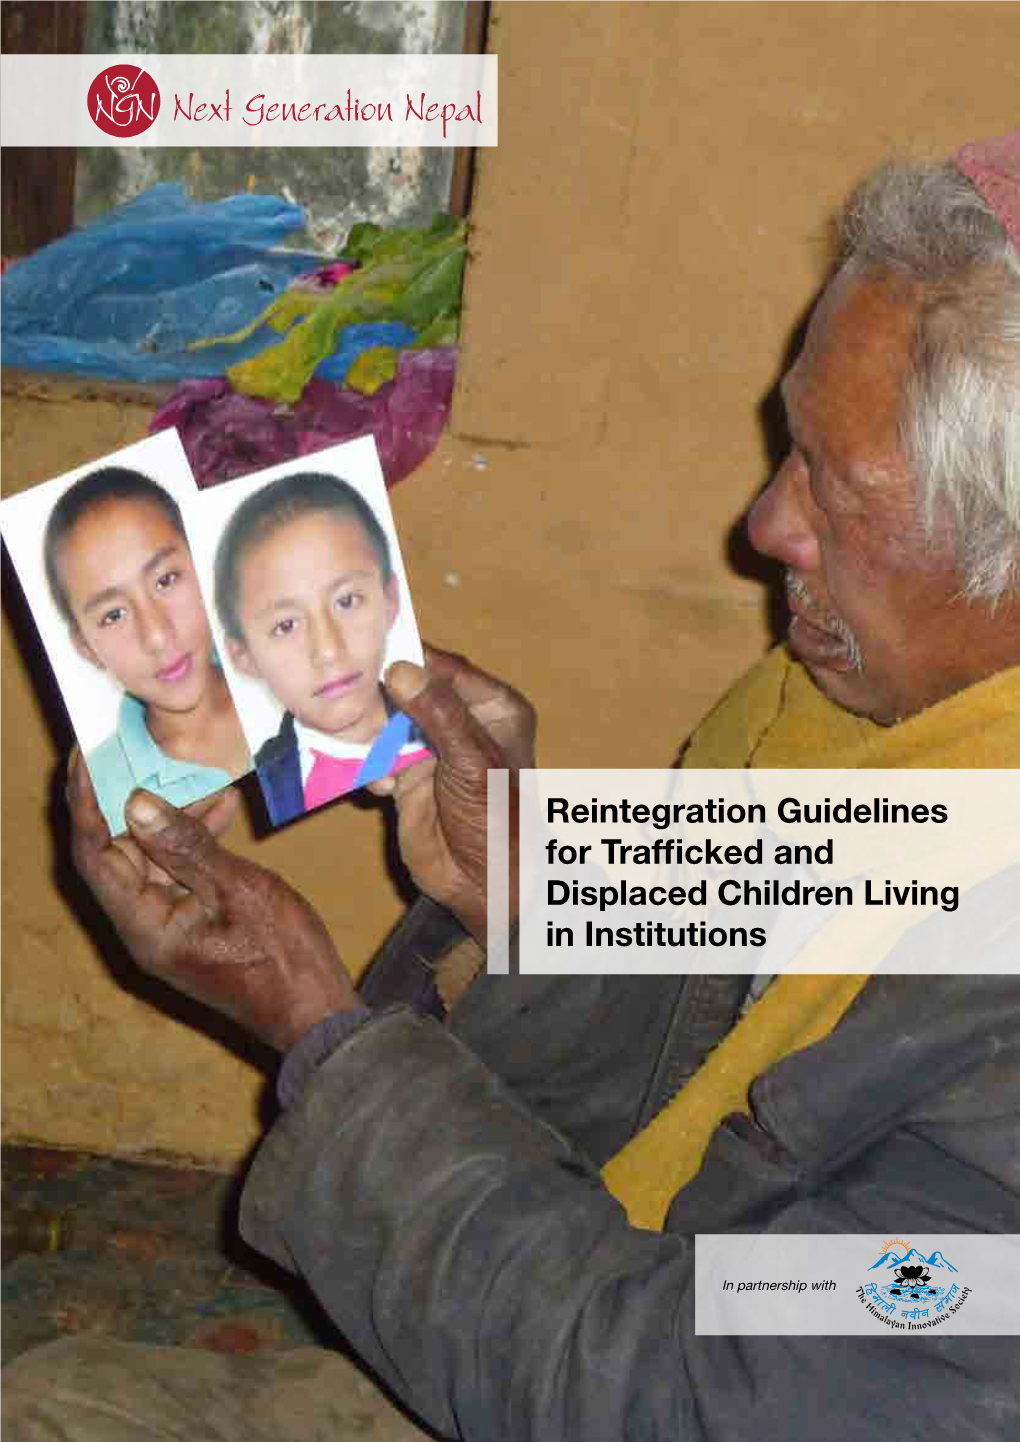 Reintegration Guidelines for Trafficked and Displaced Children Living in Institutions